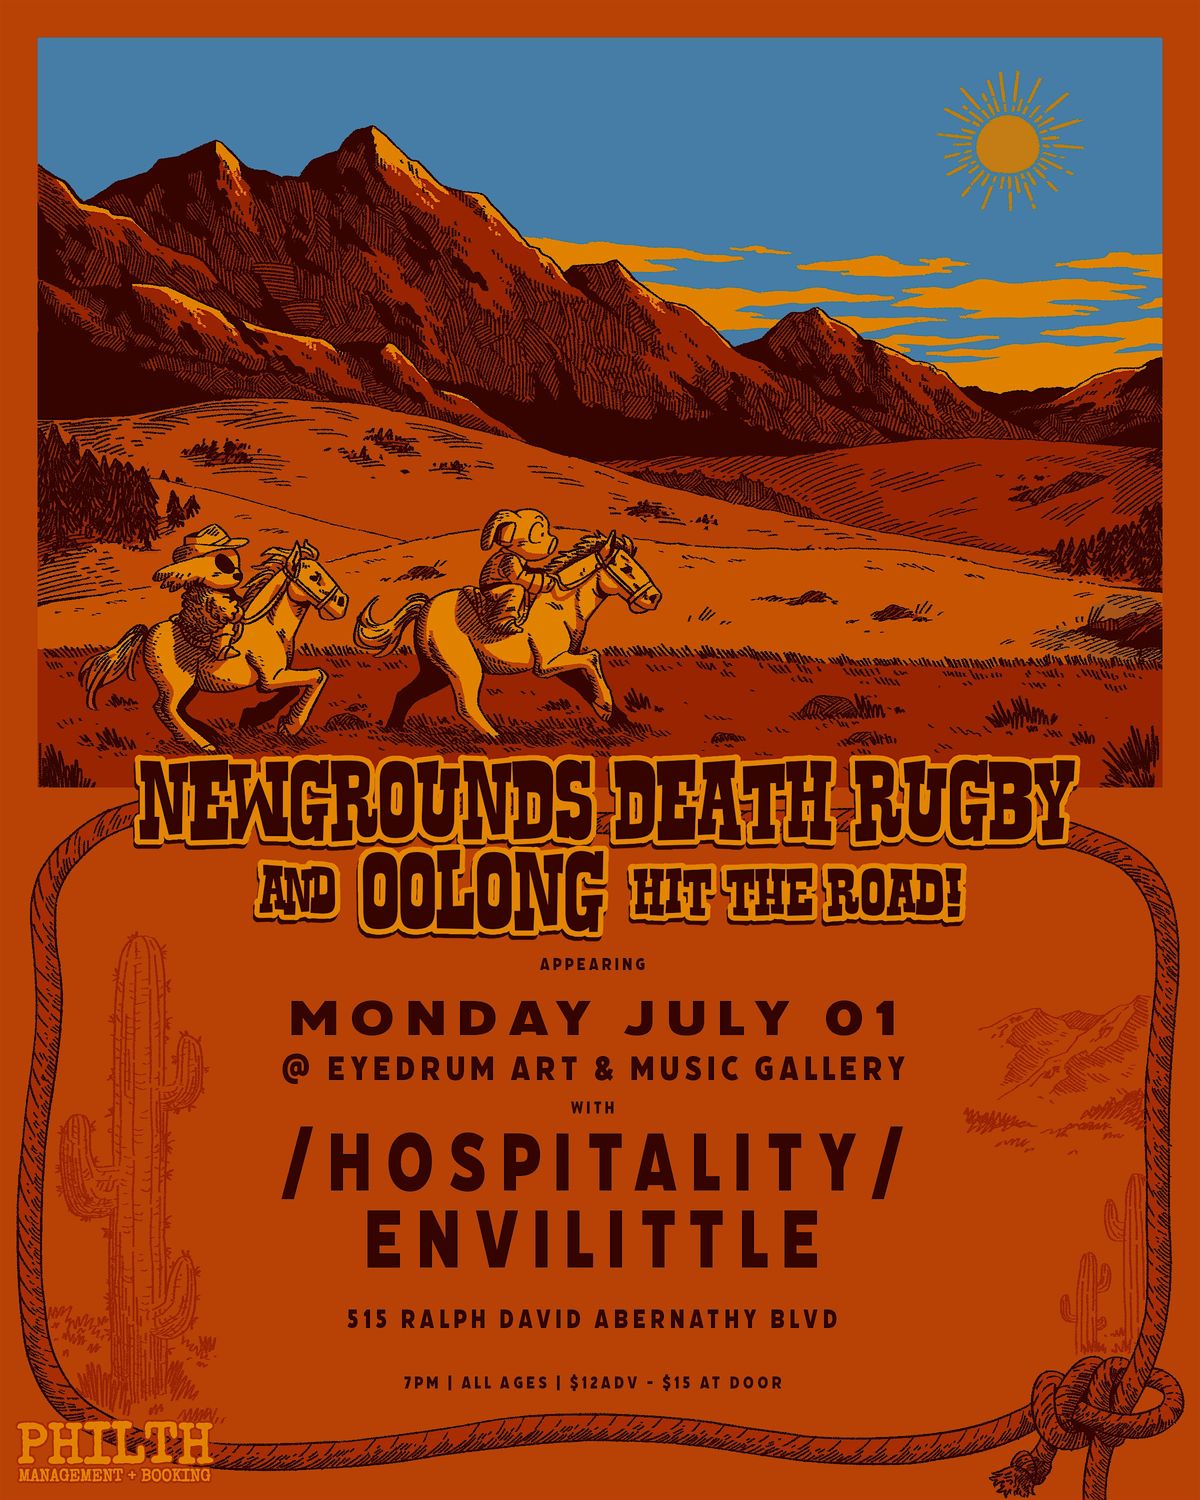 Oolong w\/ Newgrounds Death Rugby, \/Hospitality\/ and Envilittle